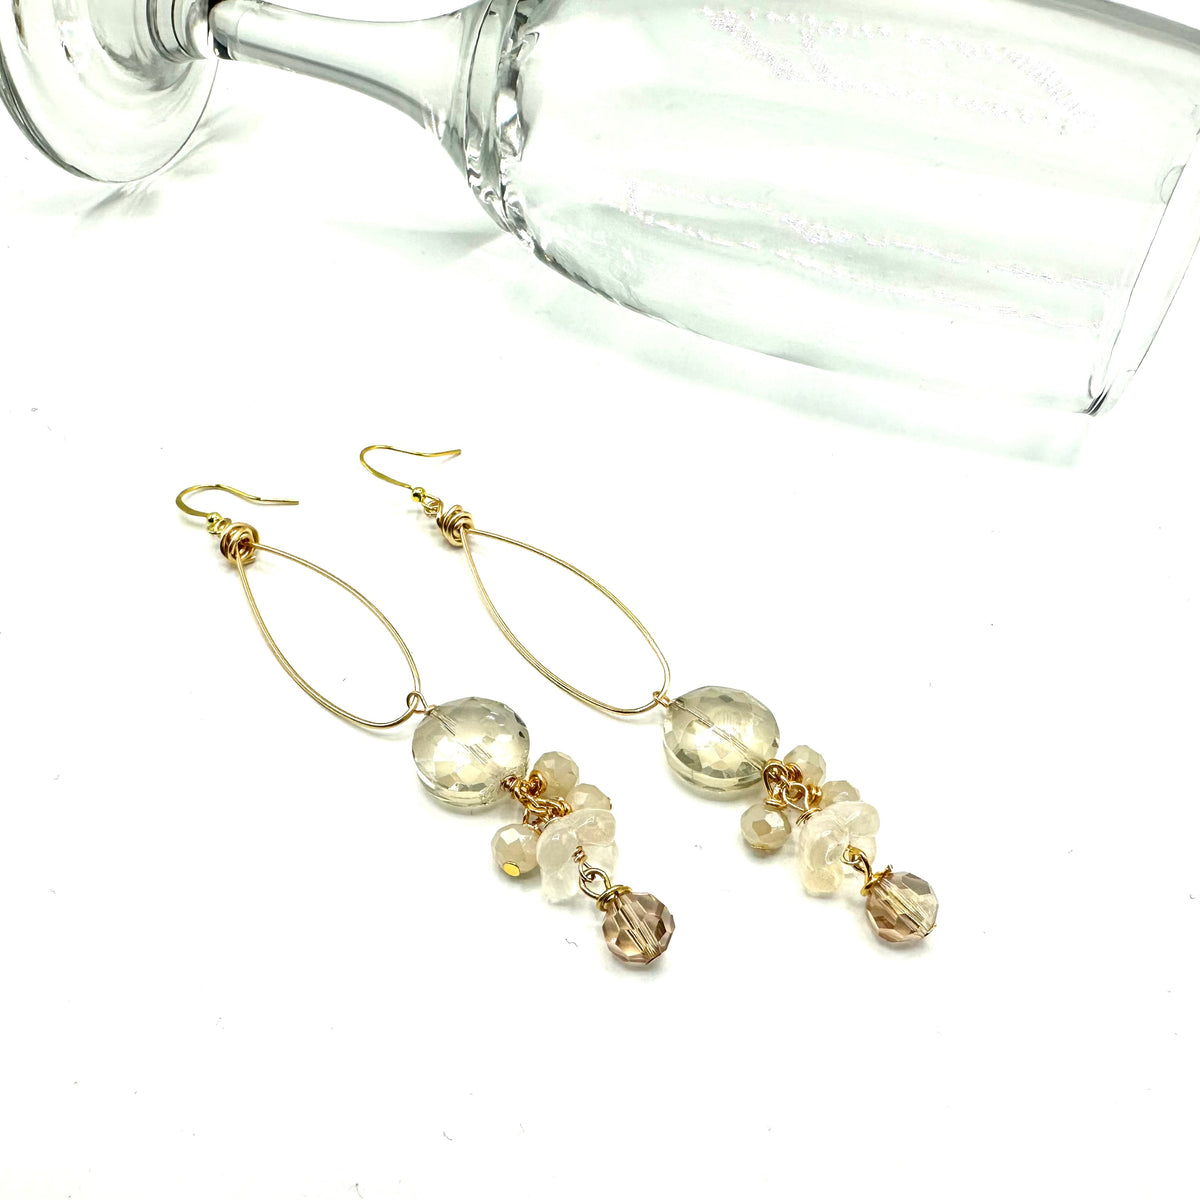 Make It At Walmart: Champagne Bubbles Earrings with Deb Floros